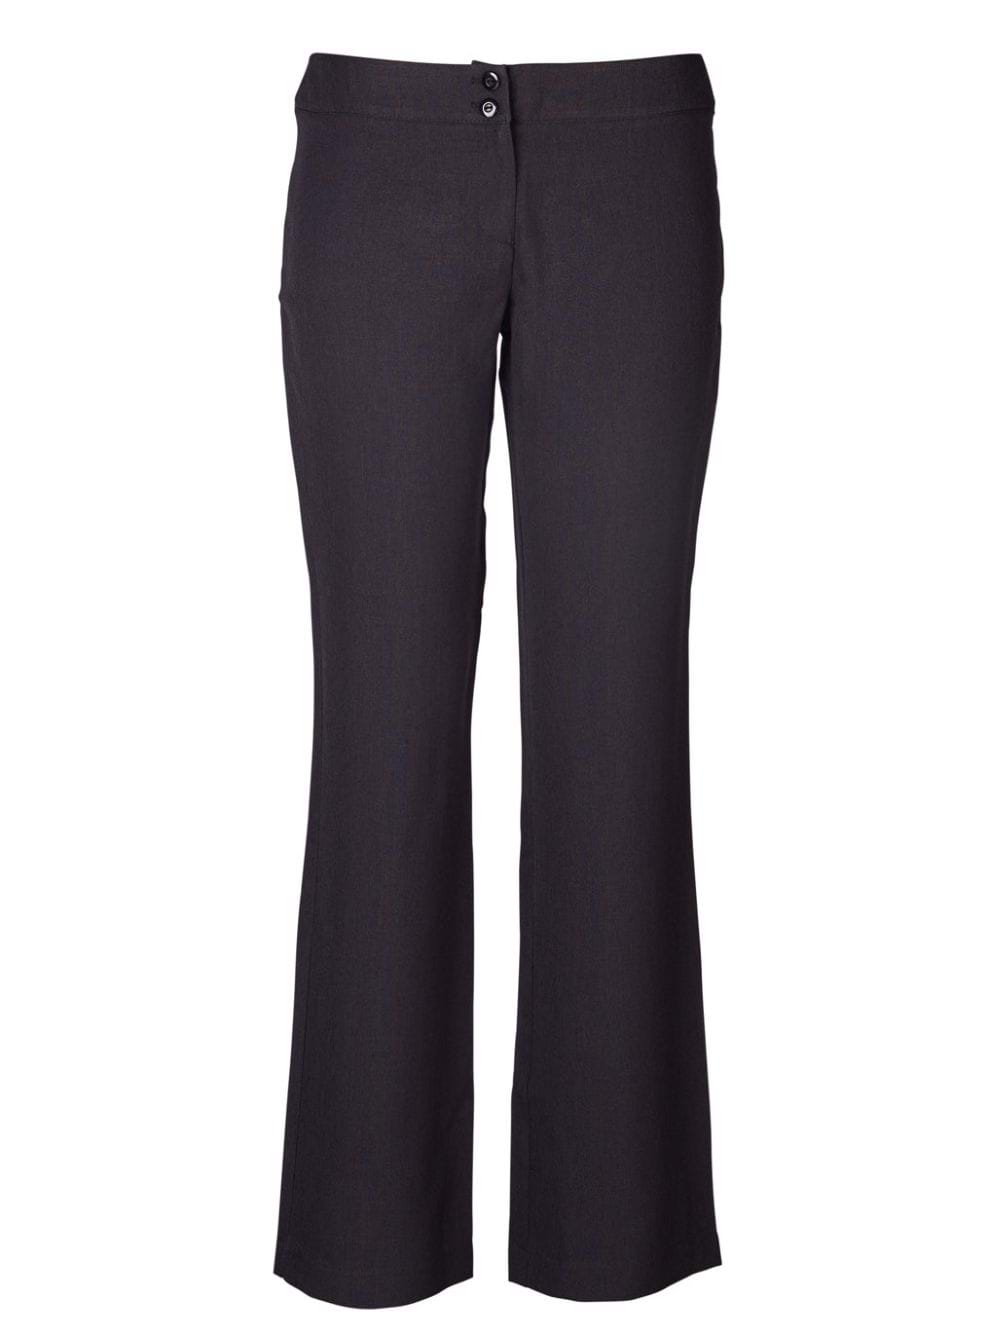 Susan Hipster Pants - Cationic Charcoal Grey / 44